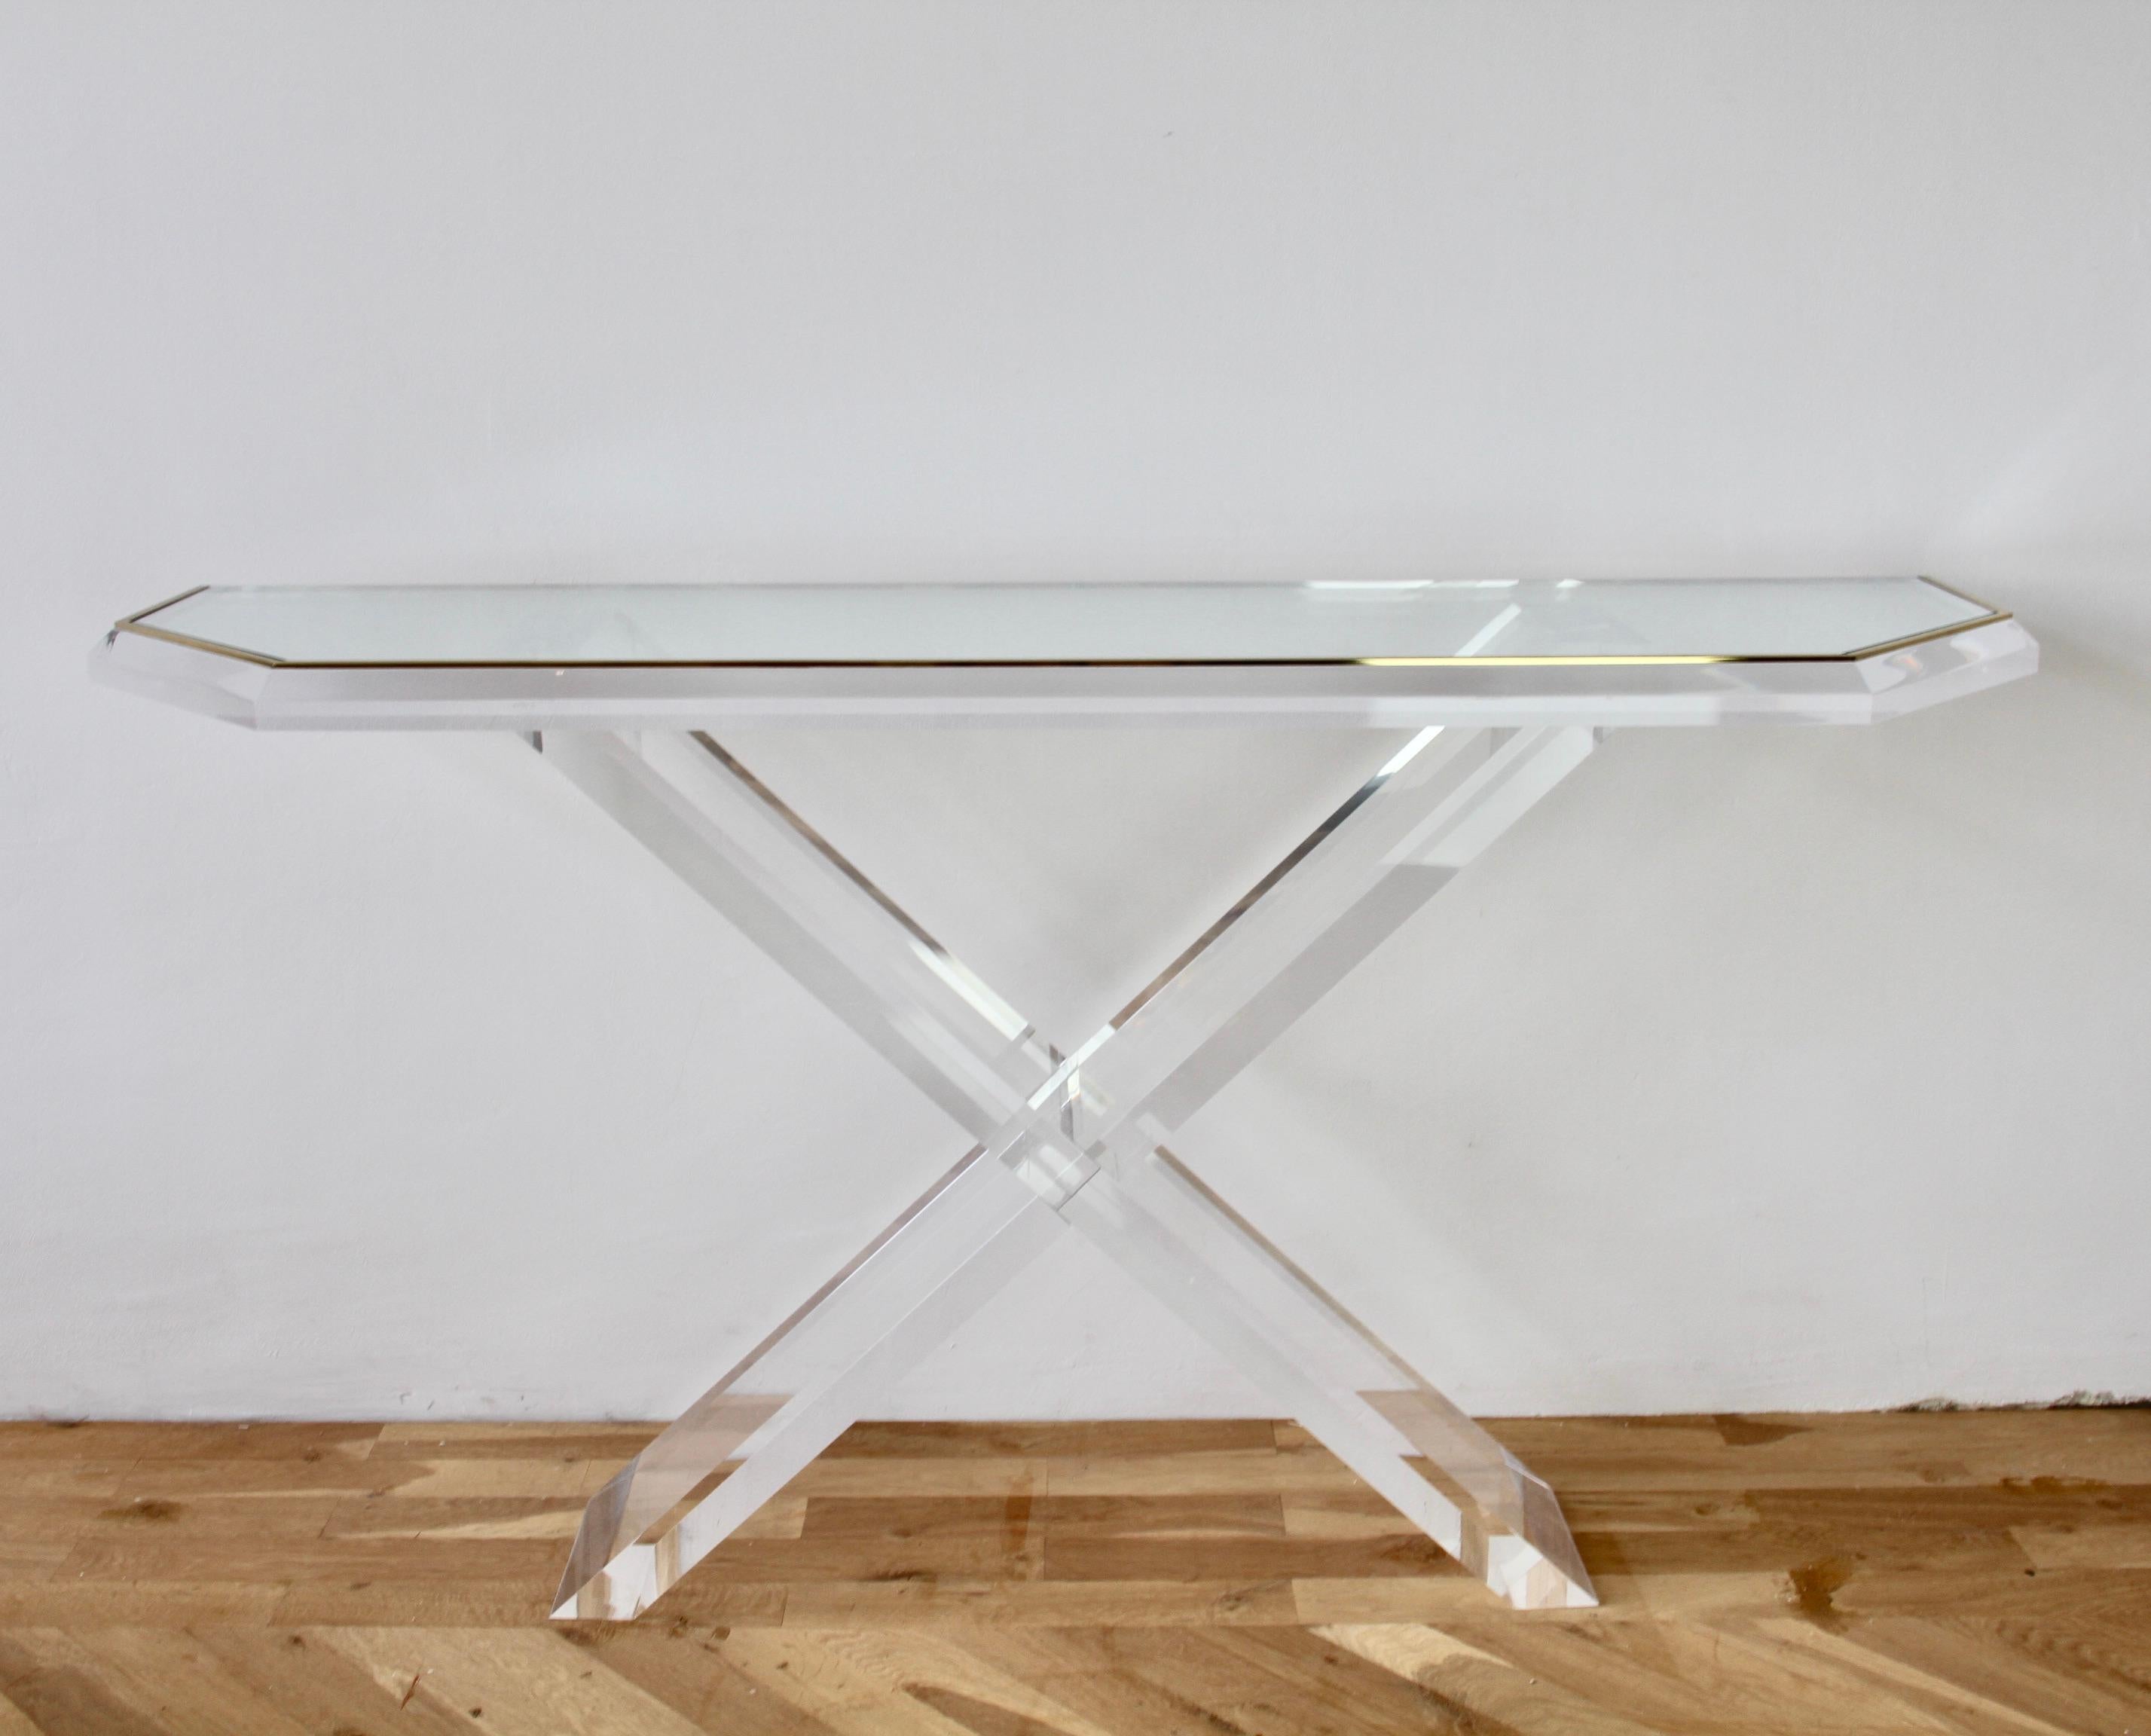 Charles Hollis Jones style huge five foot long (149.5cm) console, foyer or entrance table made of Lucite / acrylic with glass tabletop with brass trim and angled corners, circa 1980s. The heavy and thick Lucite legs and X-base frame hold the glass